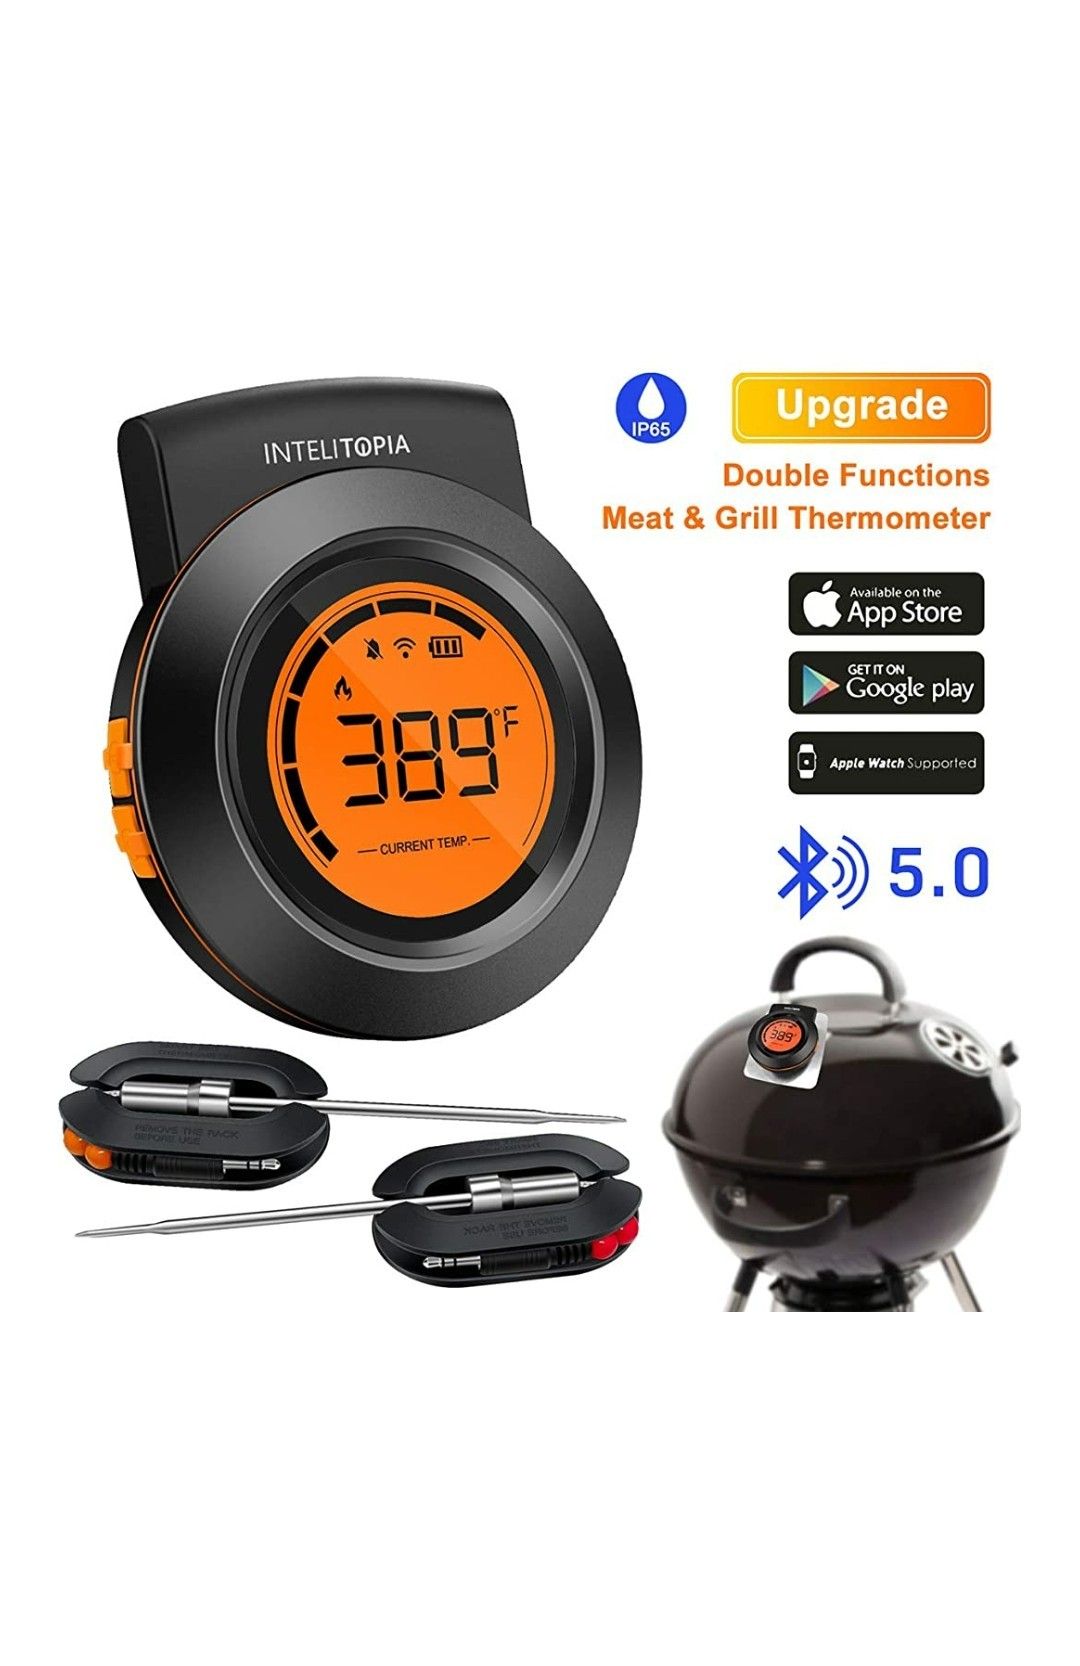 (JJ10) Bluetooth Meat Thermometer for Grilling, Wireless Charcoal Grill Thermometer Digital BBQ Wood Pellet Smoker Thermometer